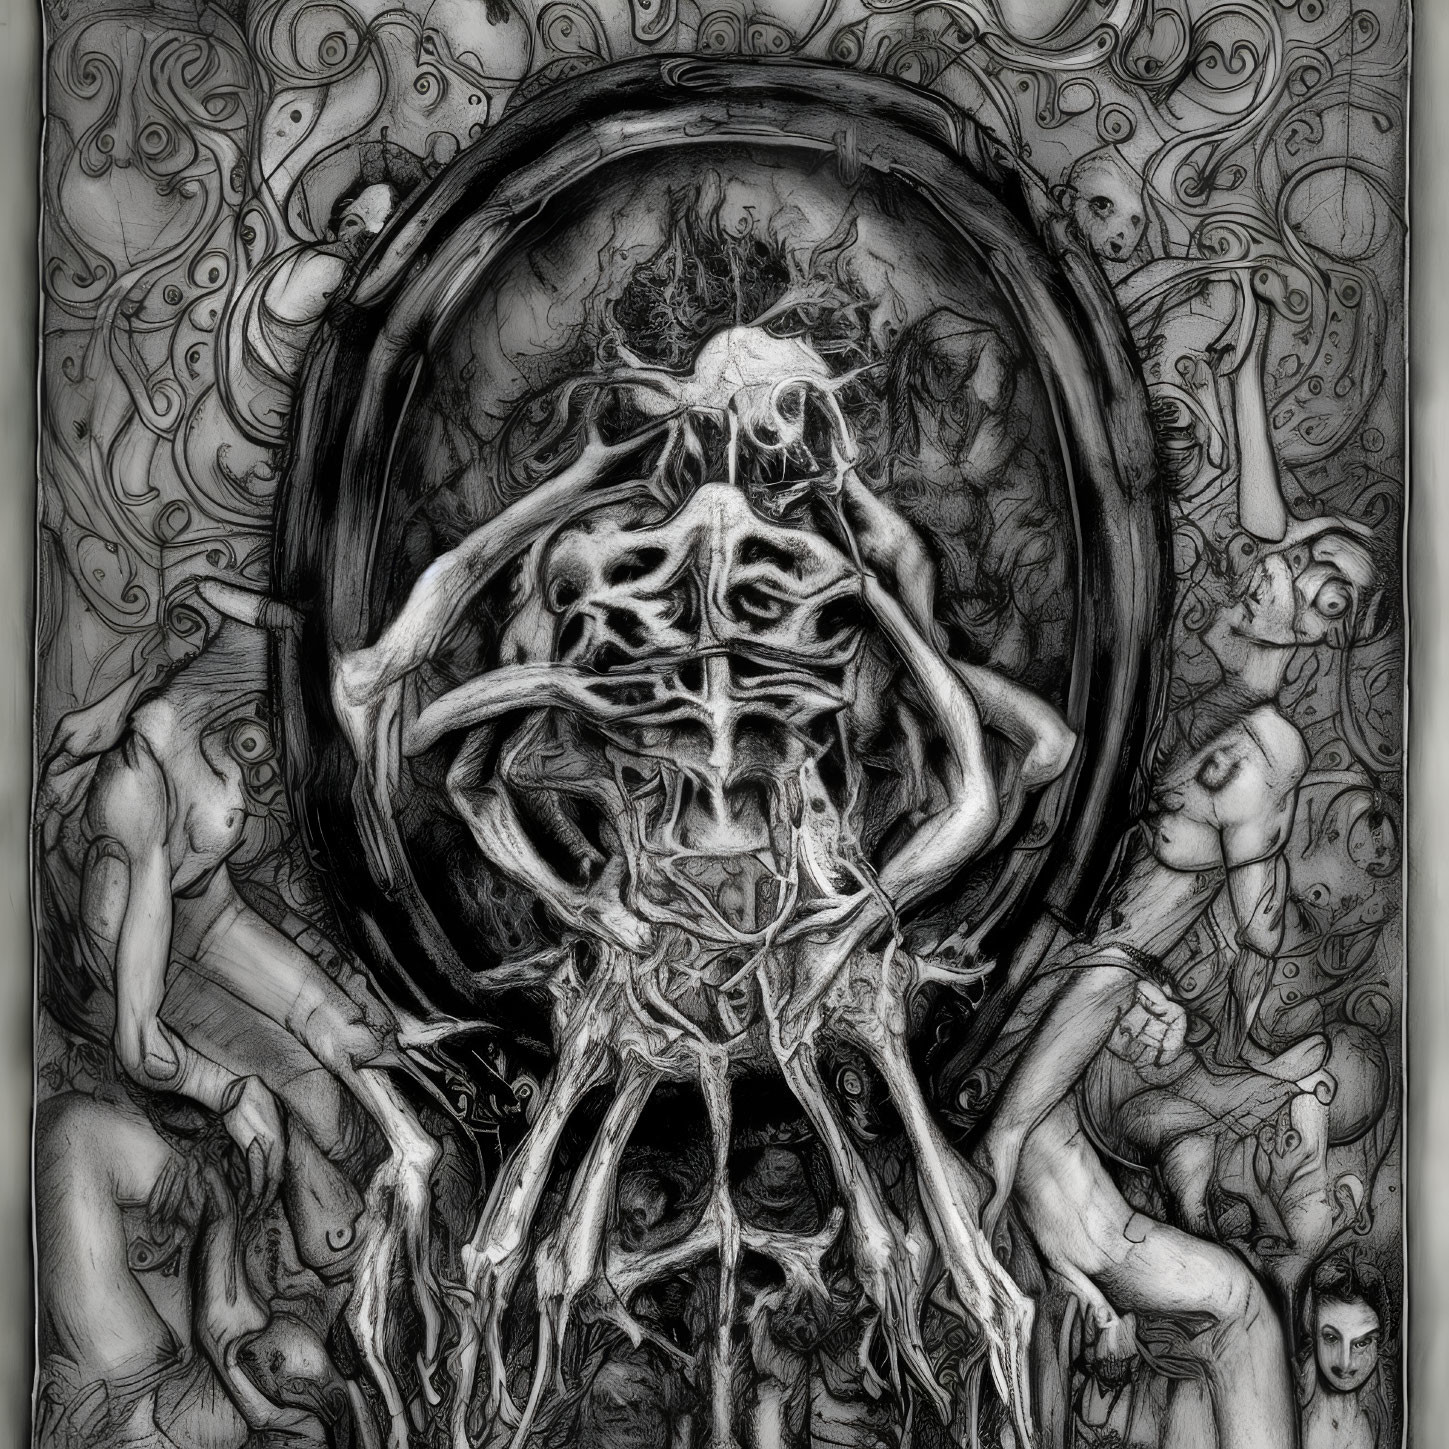 Detailed monochromatic drawing of skeletal figures in circular frame with surreal human shapes.